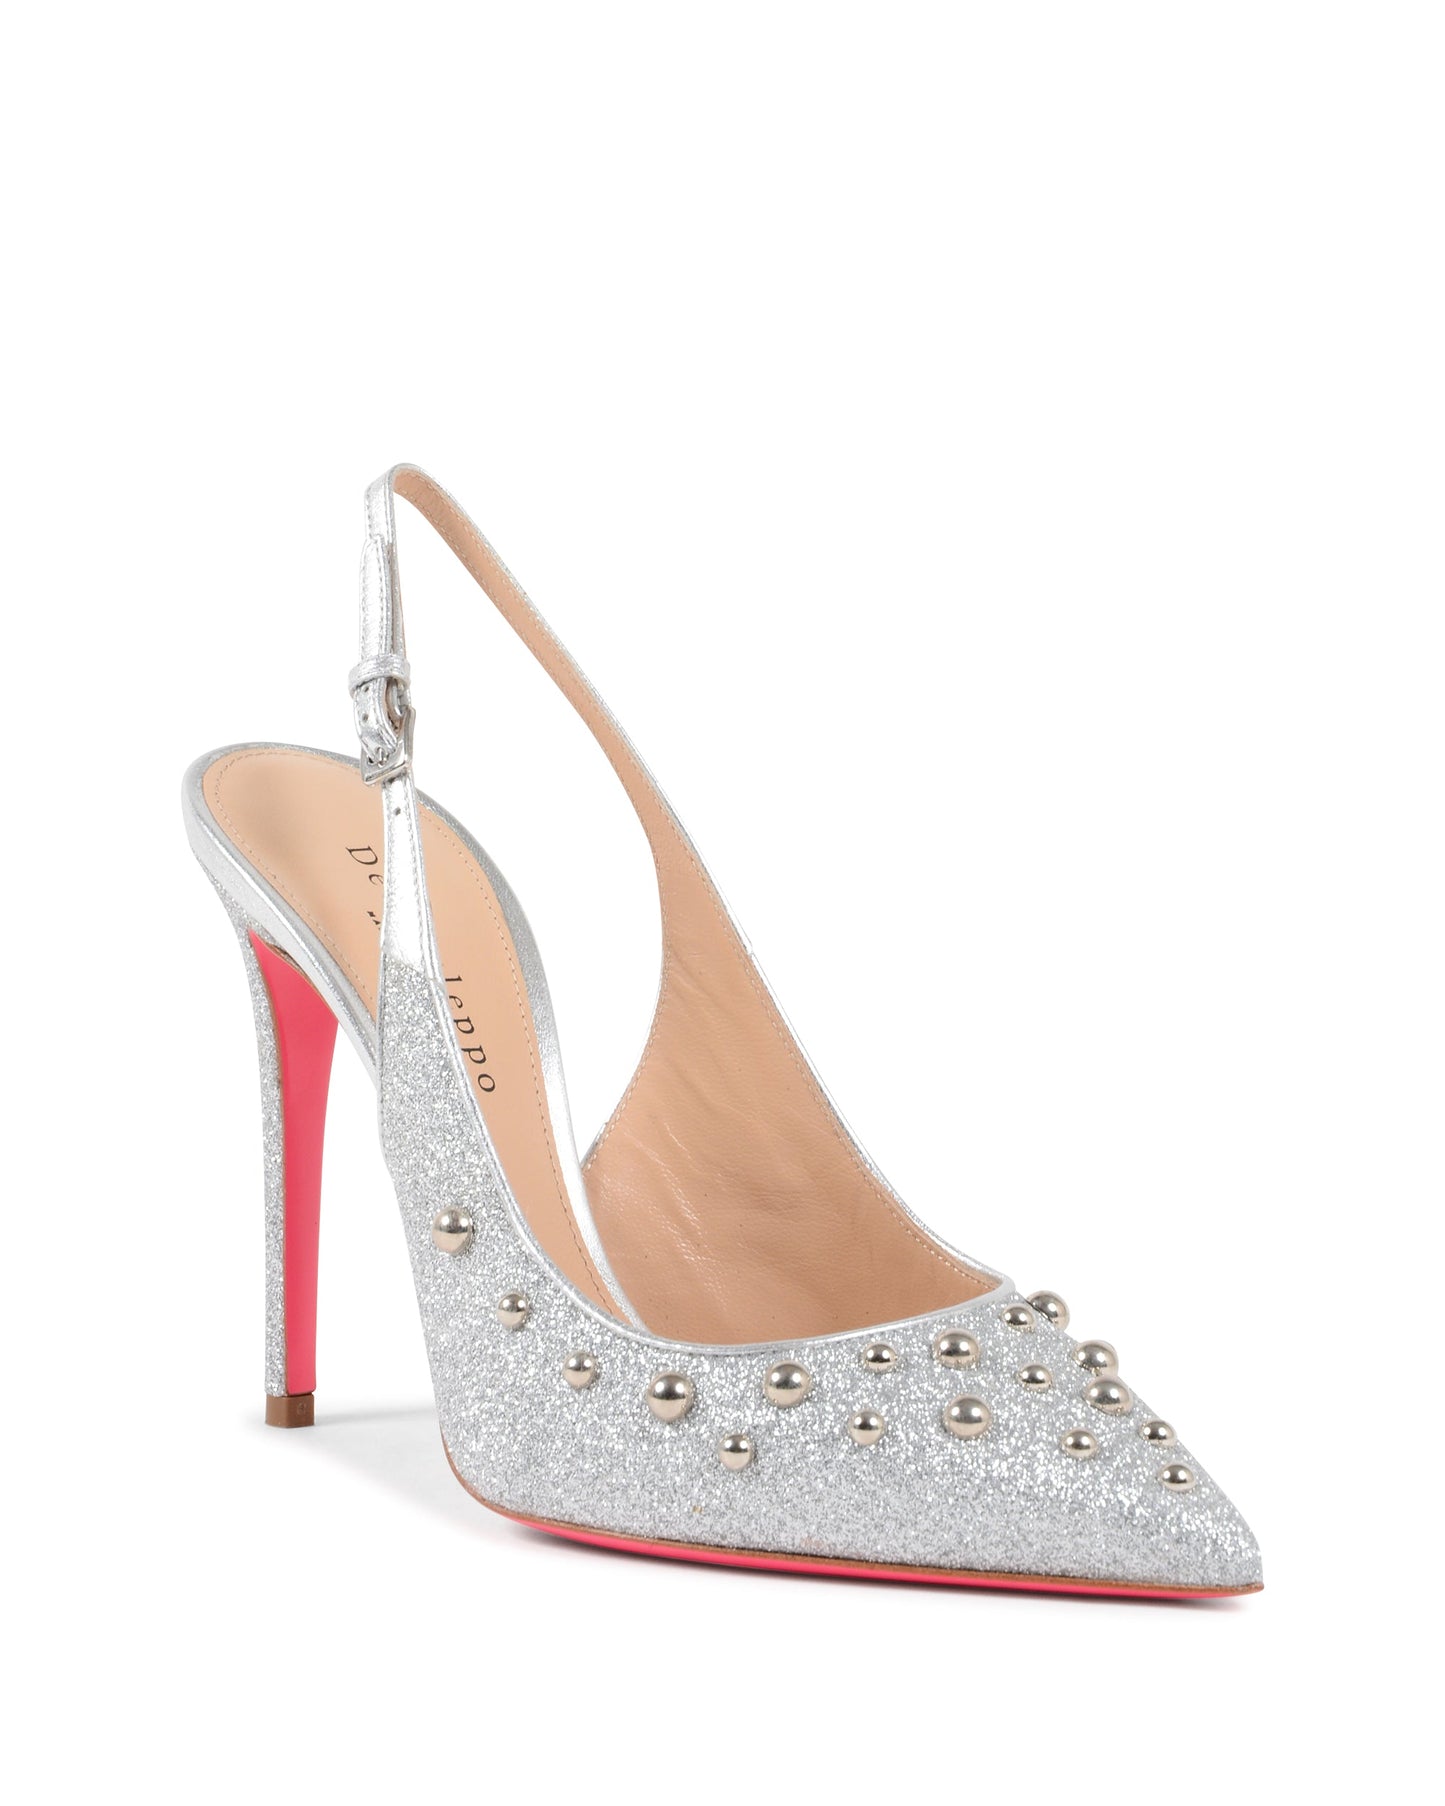 Cocktail Hour Slingback Silver